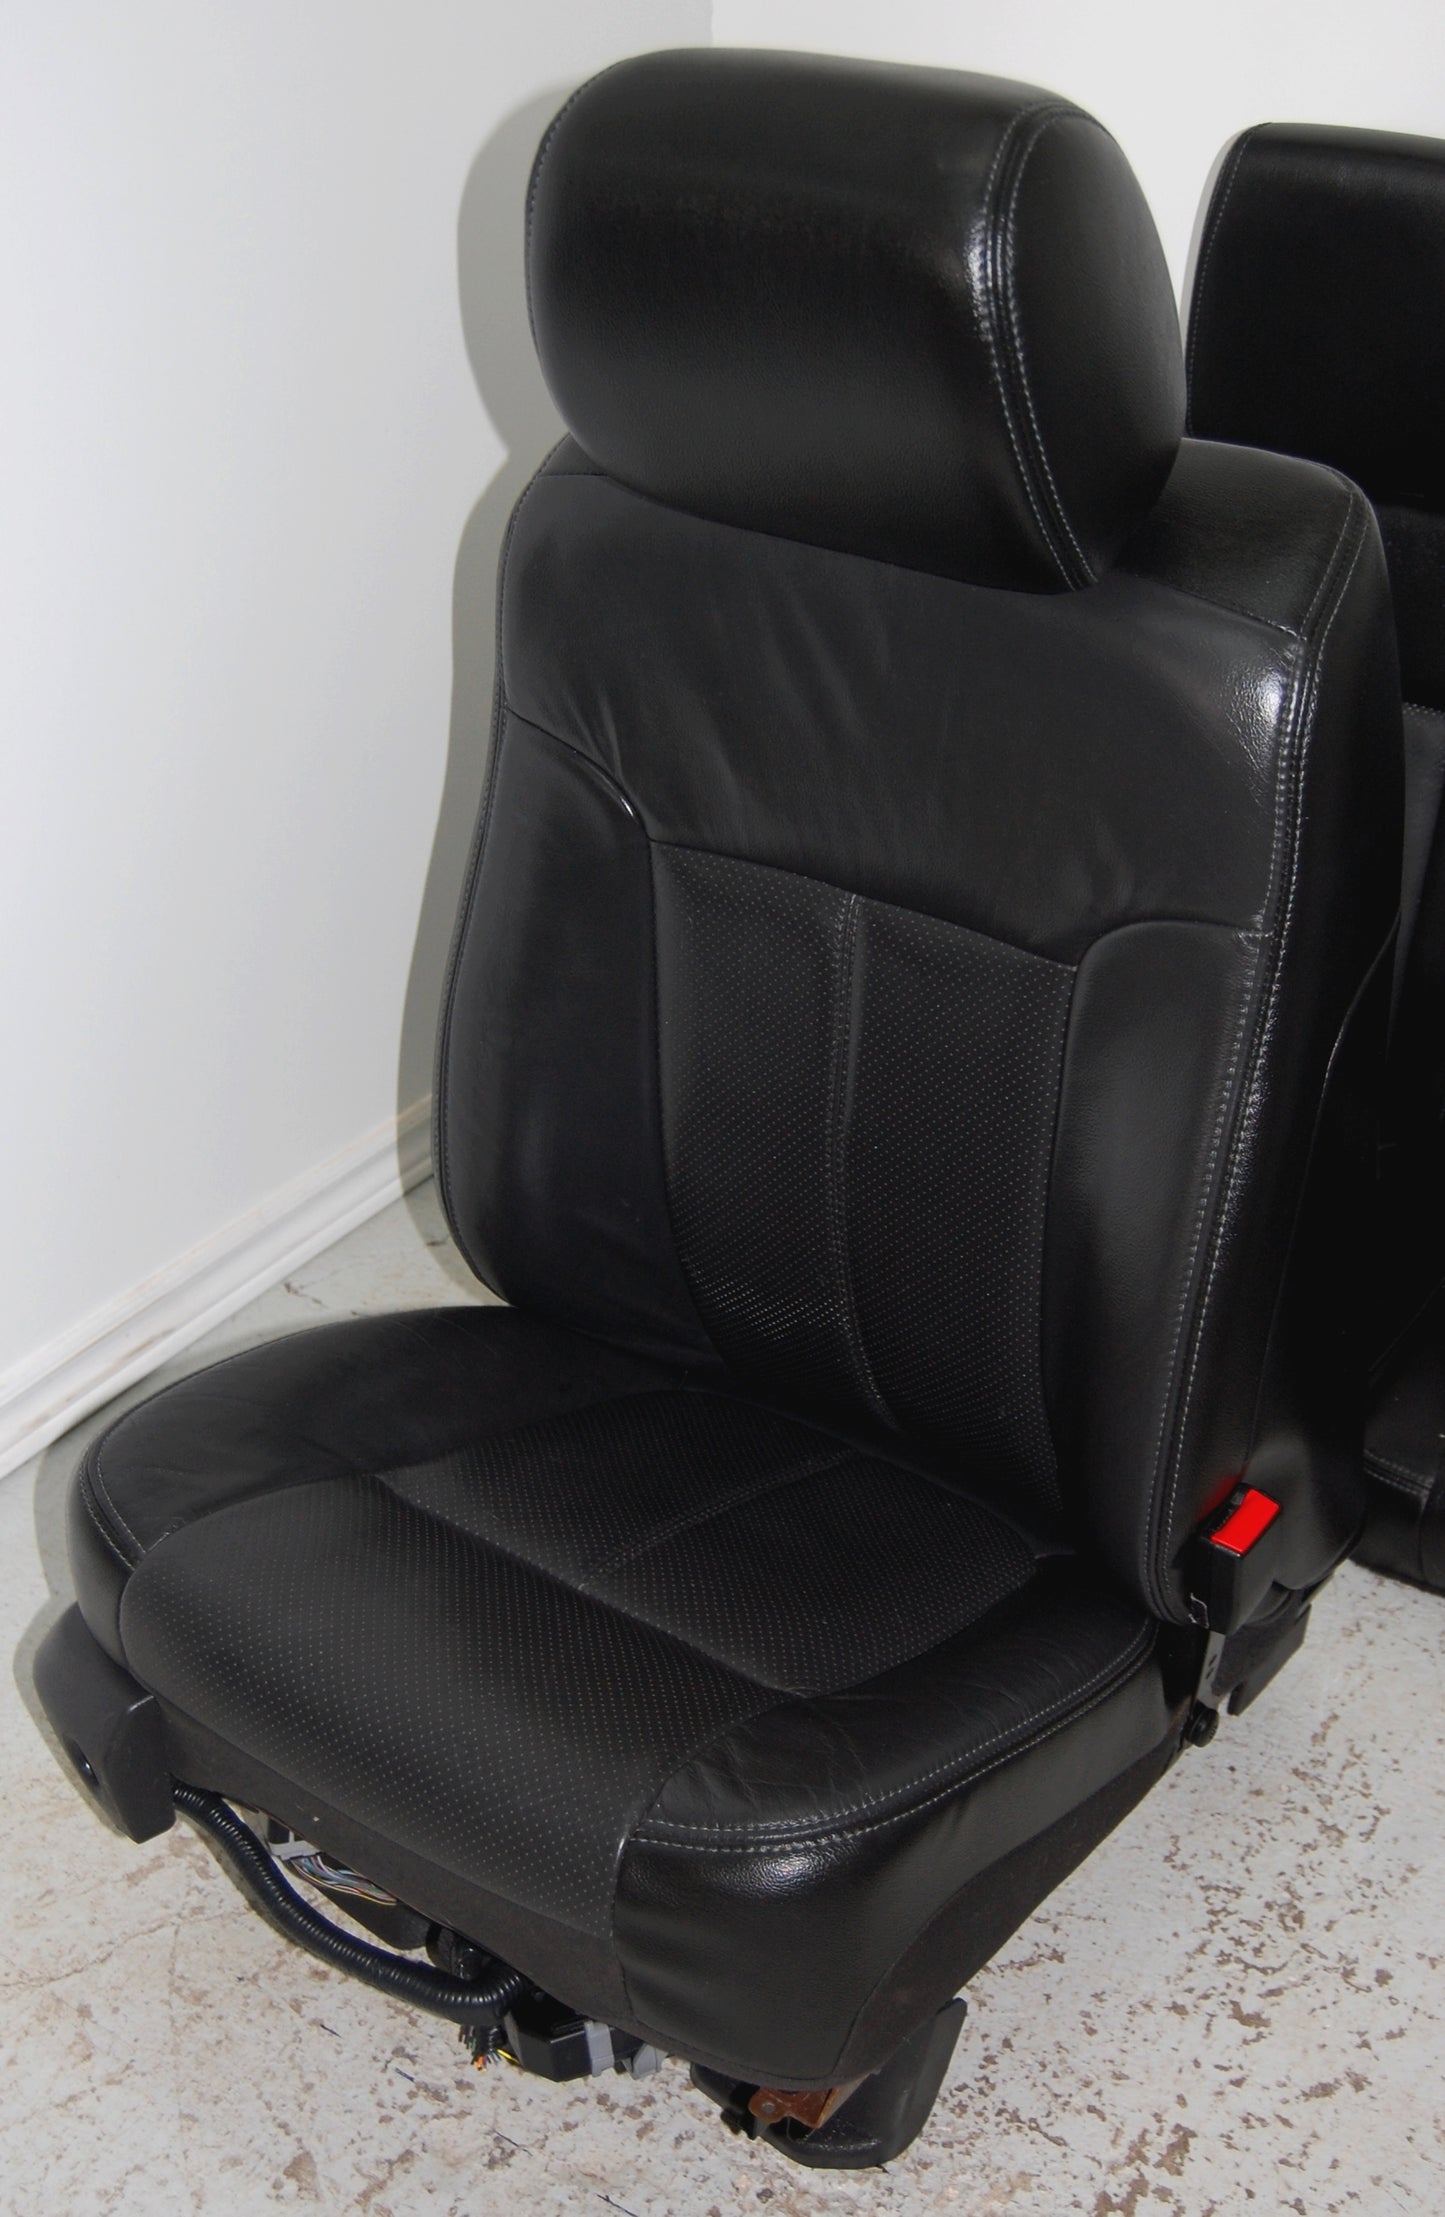 Ford F250 Super Duty BLACK LEATHER Seats Power Heated Cooled F350 F450 Superduty Truck